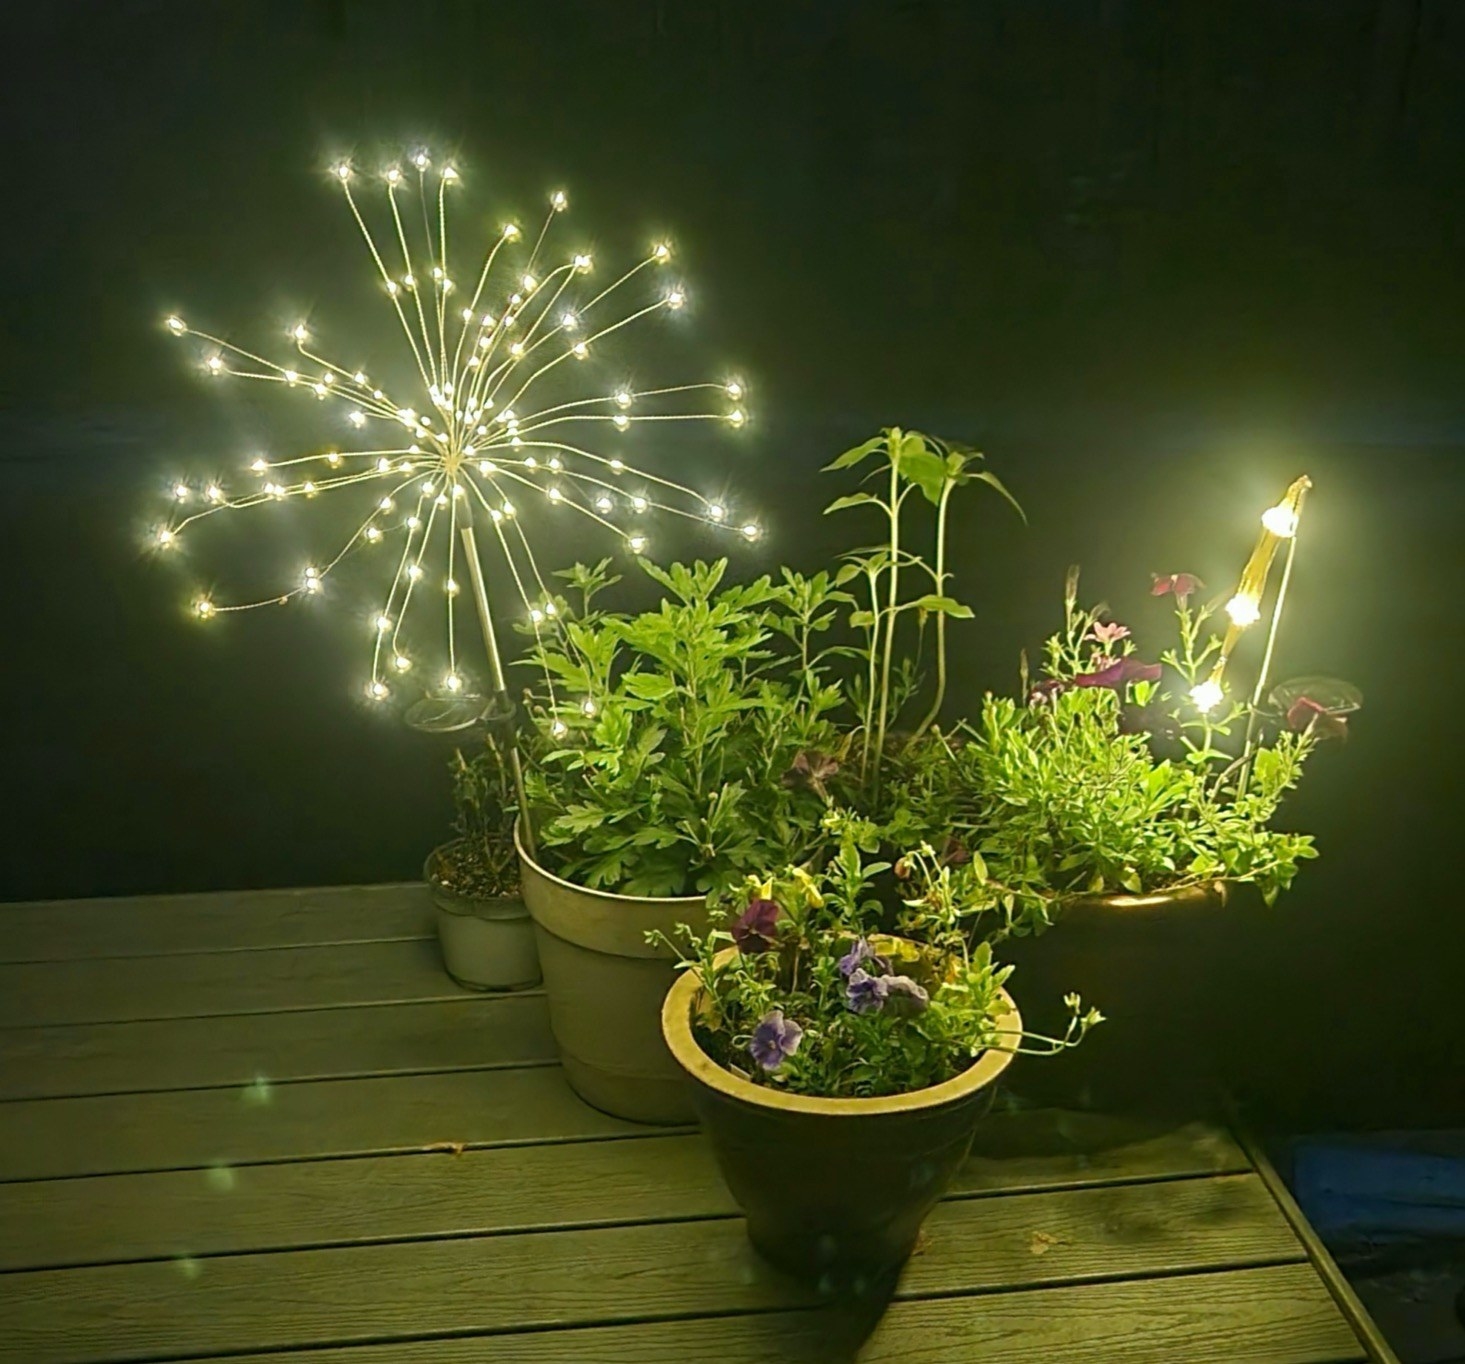 Reviewer image of outdoor lights on a patio next to potted plants